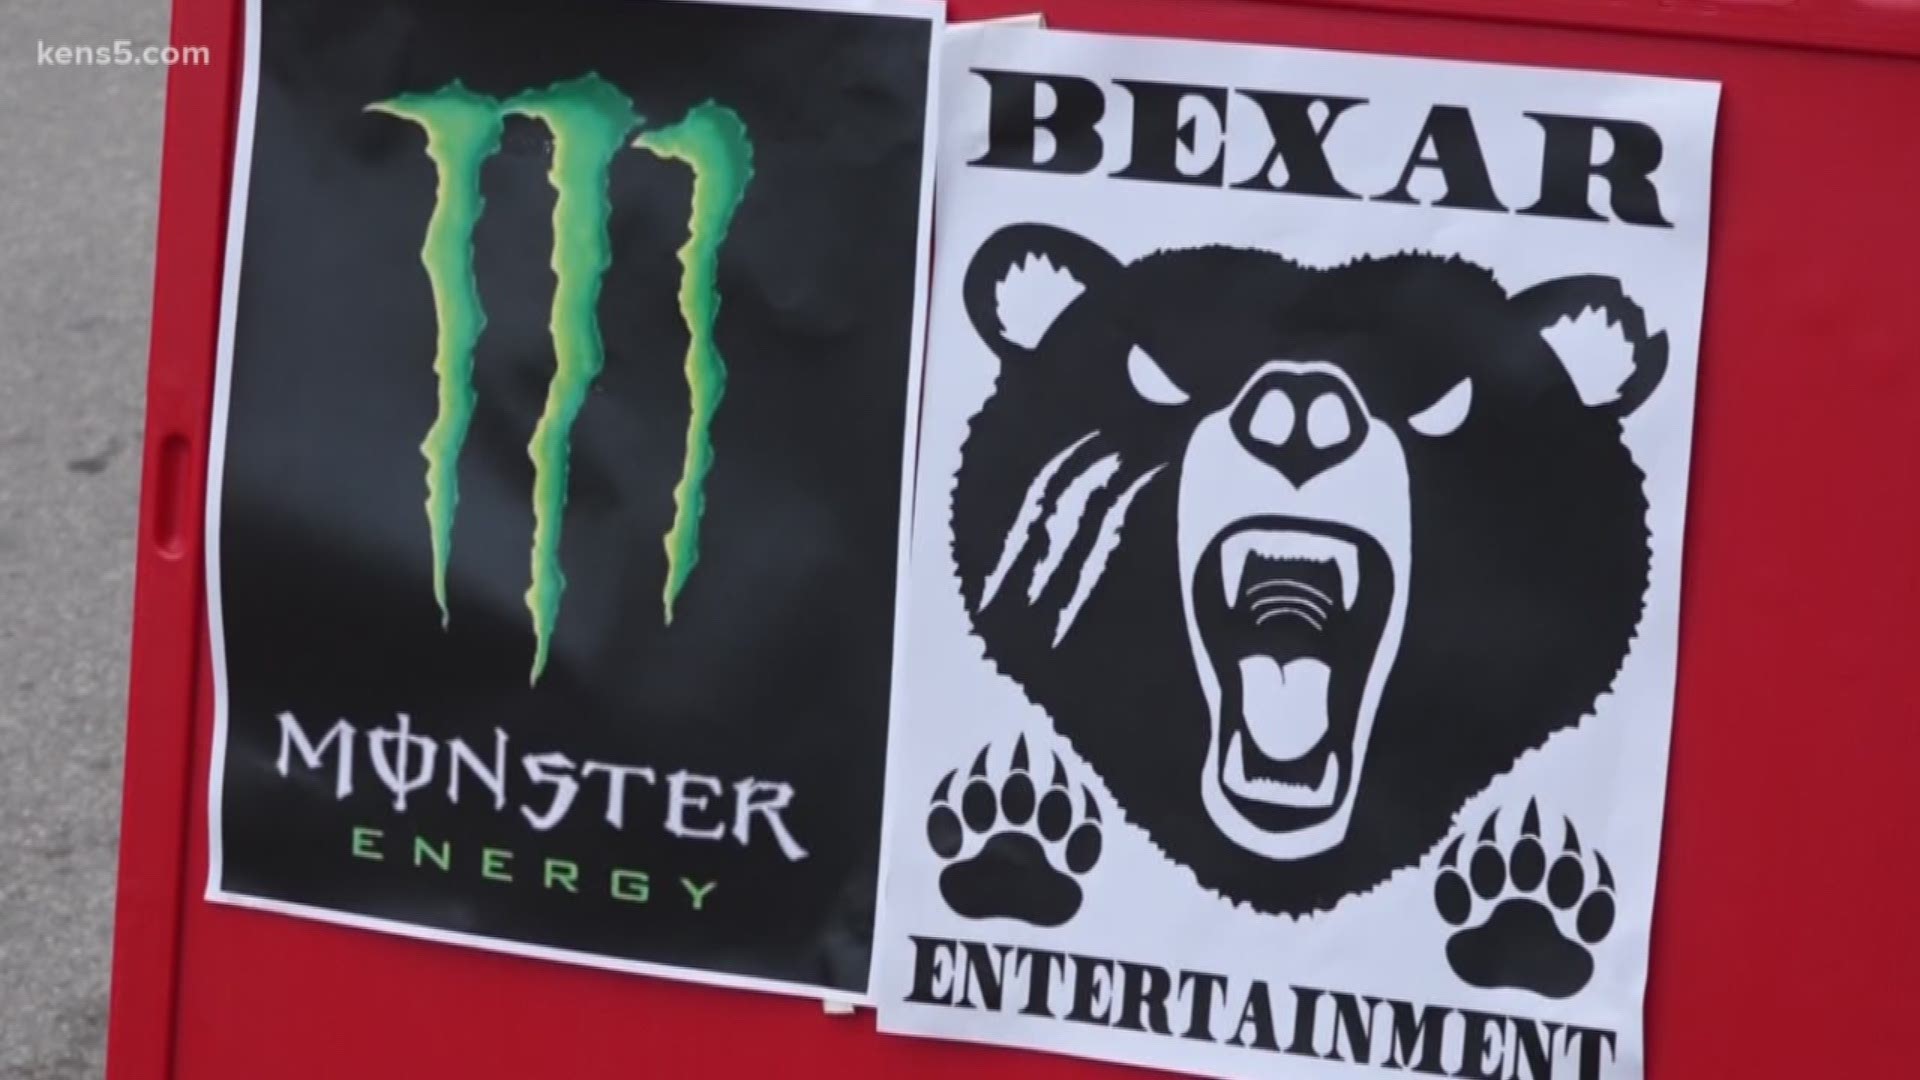 A San Antonio entertainment company claims the Monster Energy drink company wants them to change their brand. Eyewitness News reporter Adi Guajardo sat down with the company owners and tells us why it's more than just money at stake.